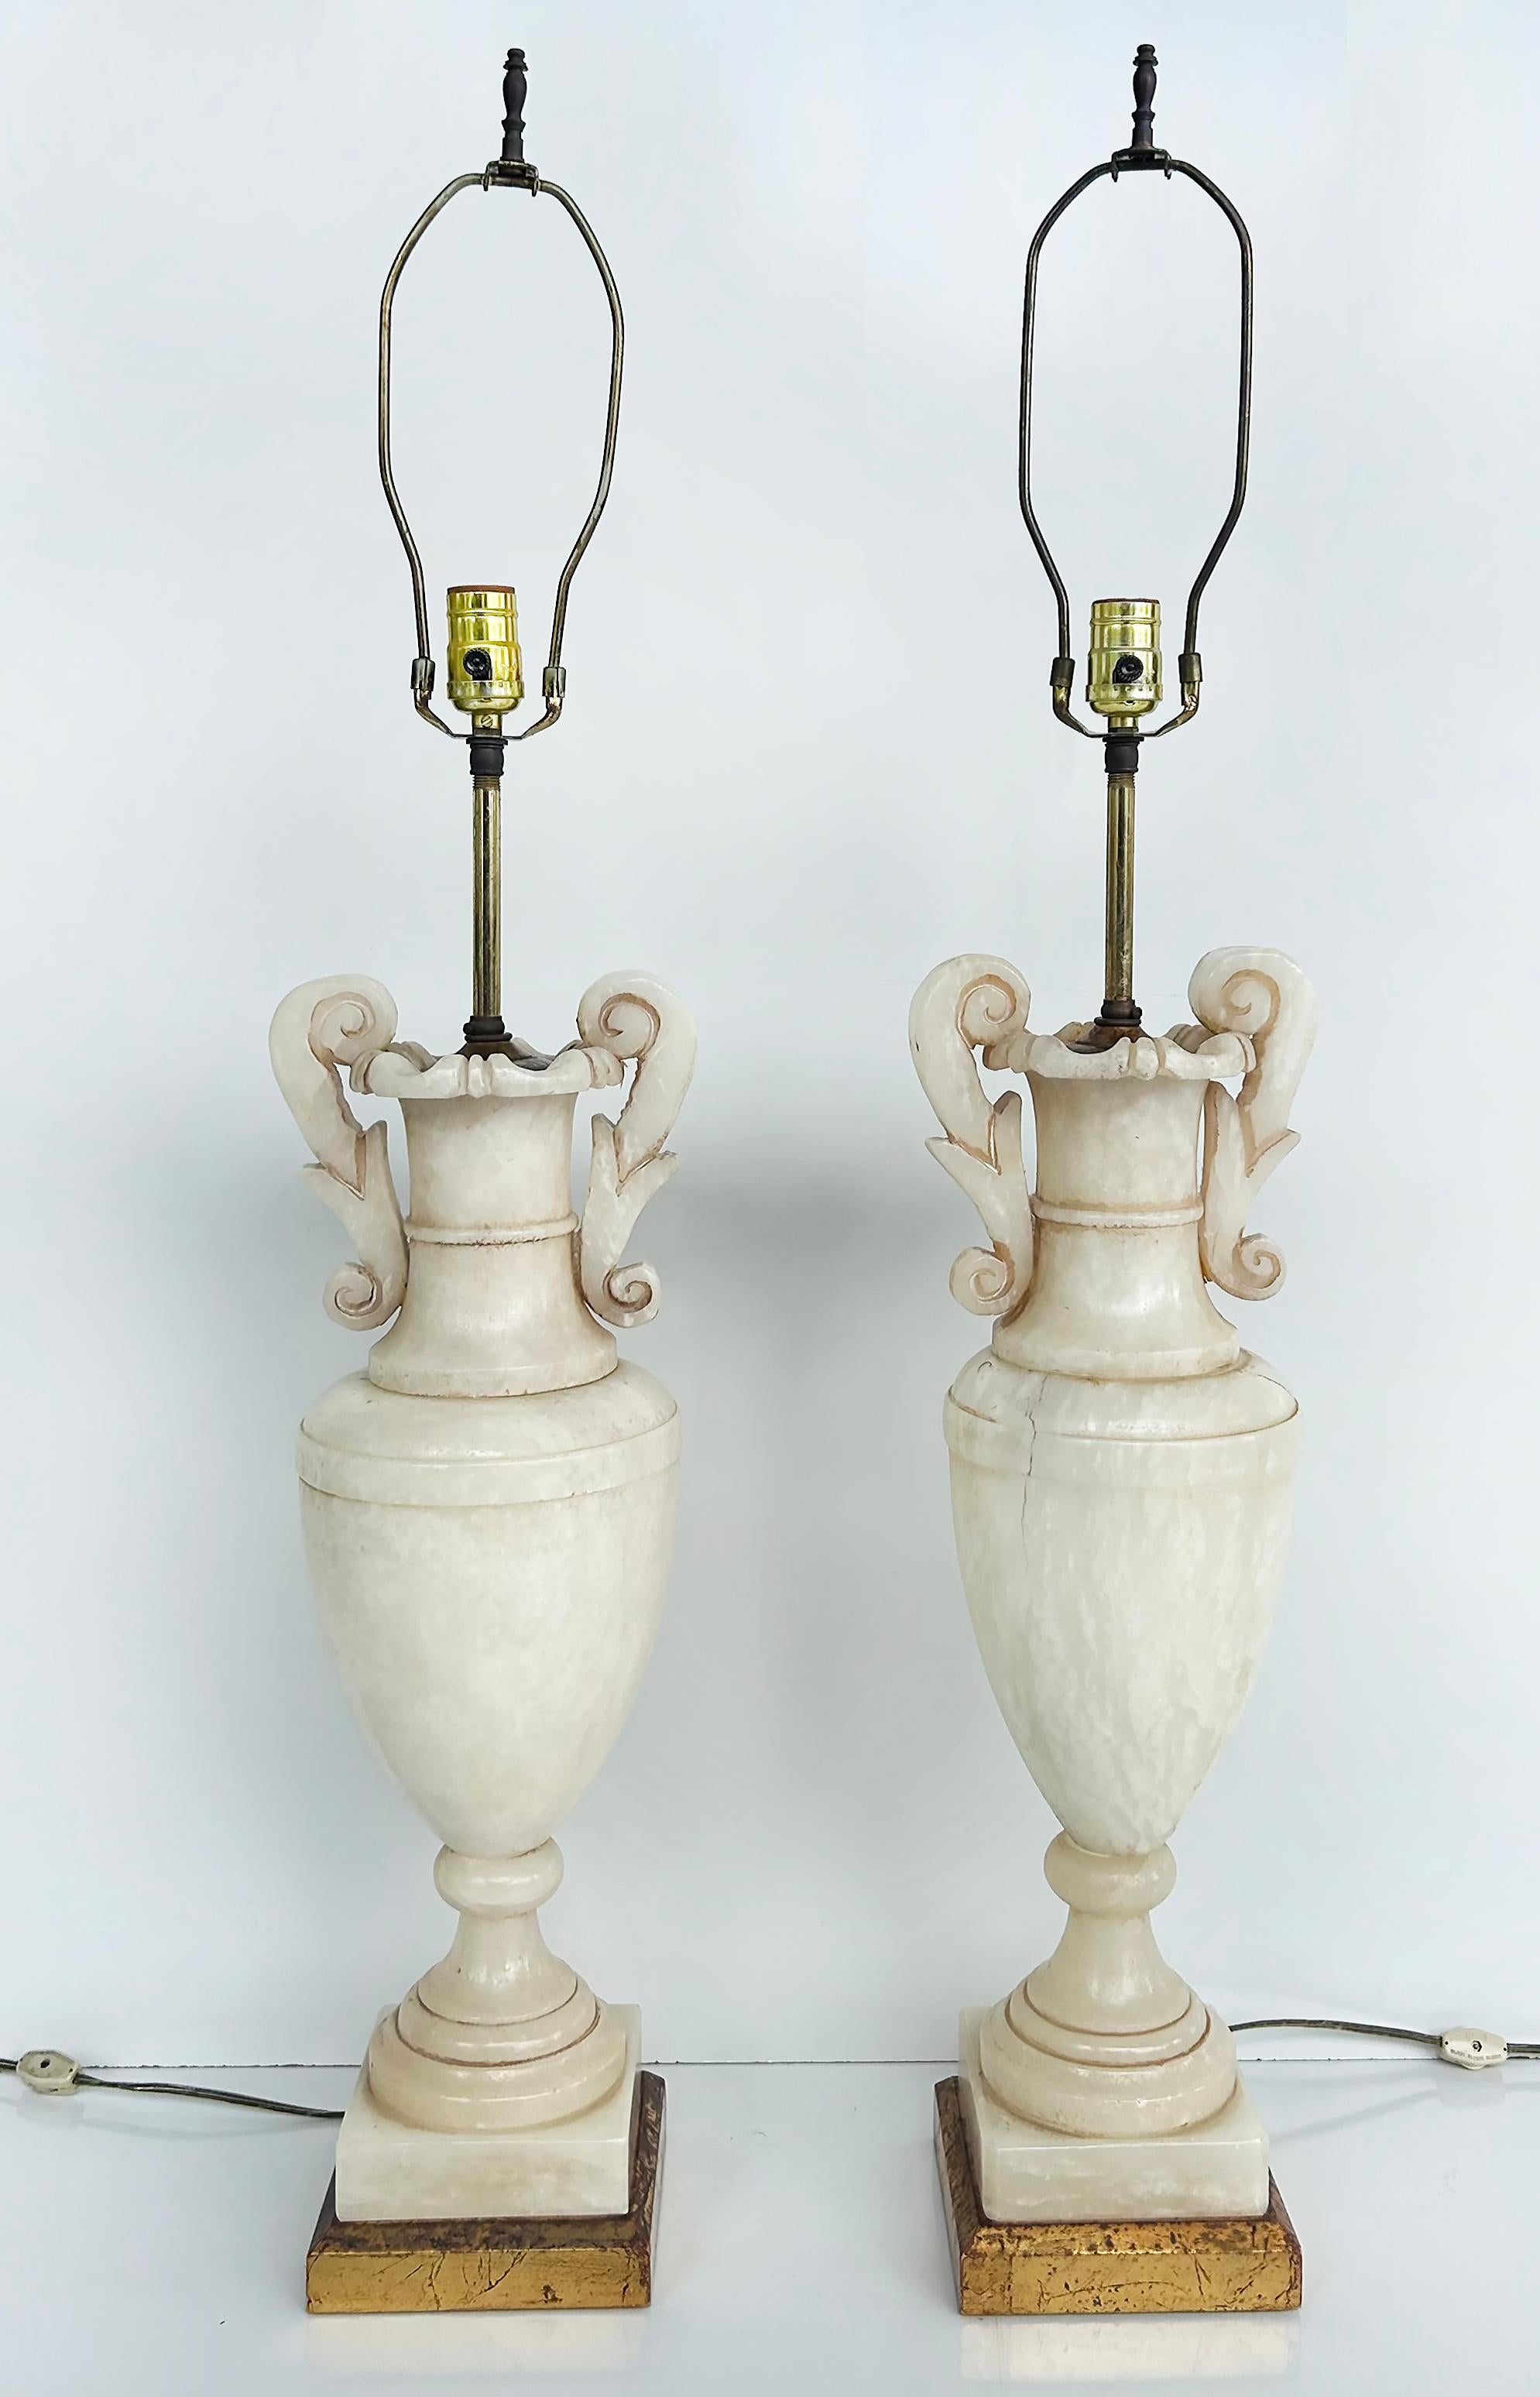 Hollywood Regency Monumental Alabaster Urn Table Lamps with Interior Lighting, Wired and Working For Sale